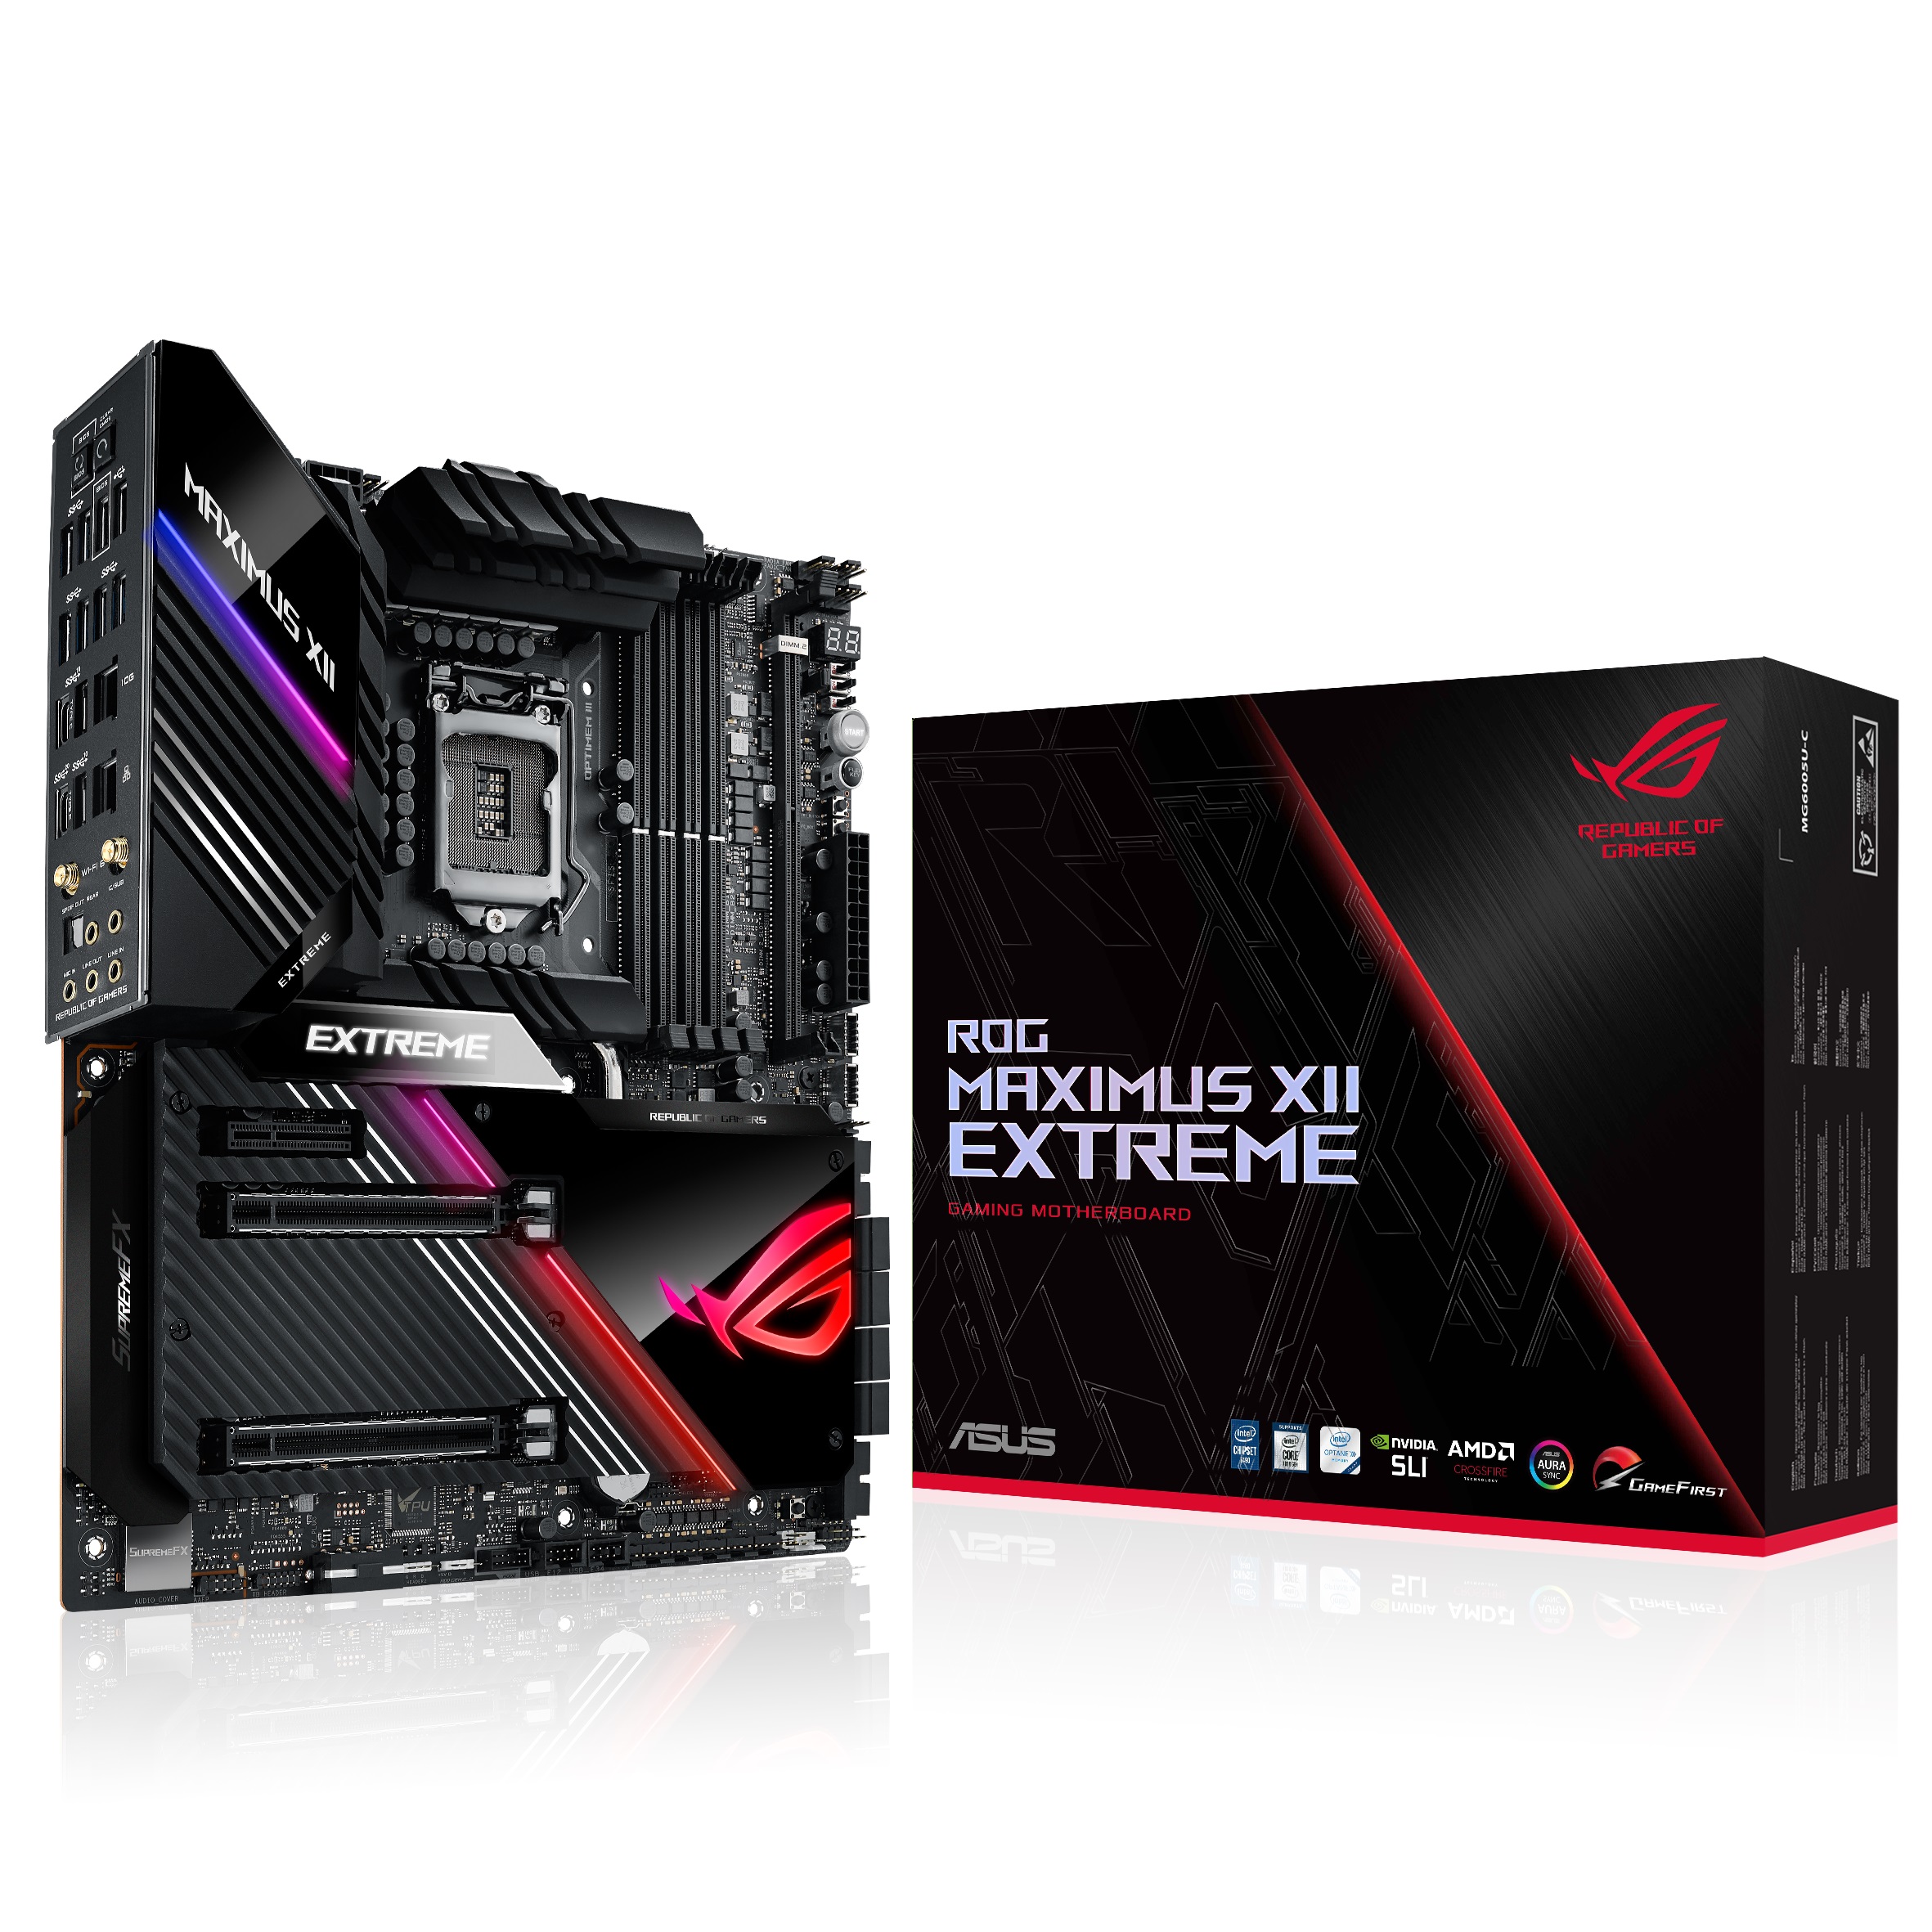 ROG MAXIMUS XII EXTREME with Box